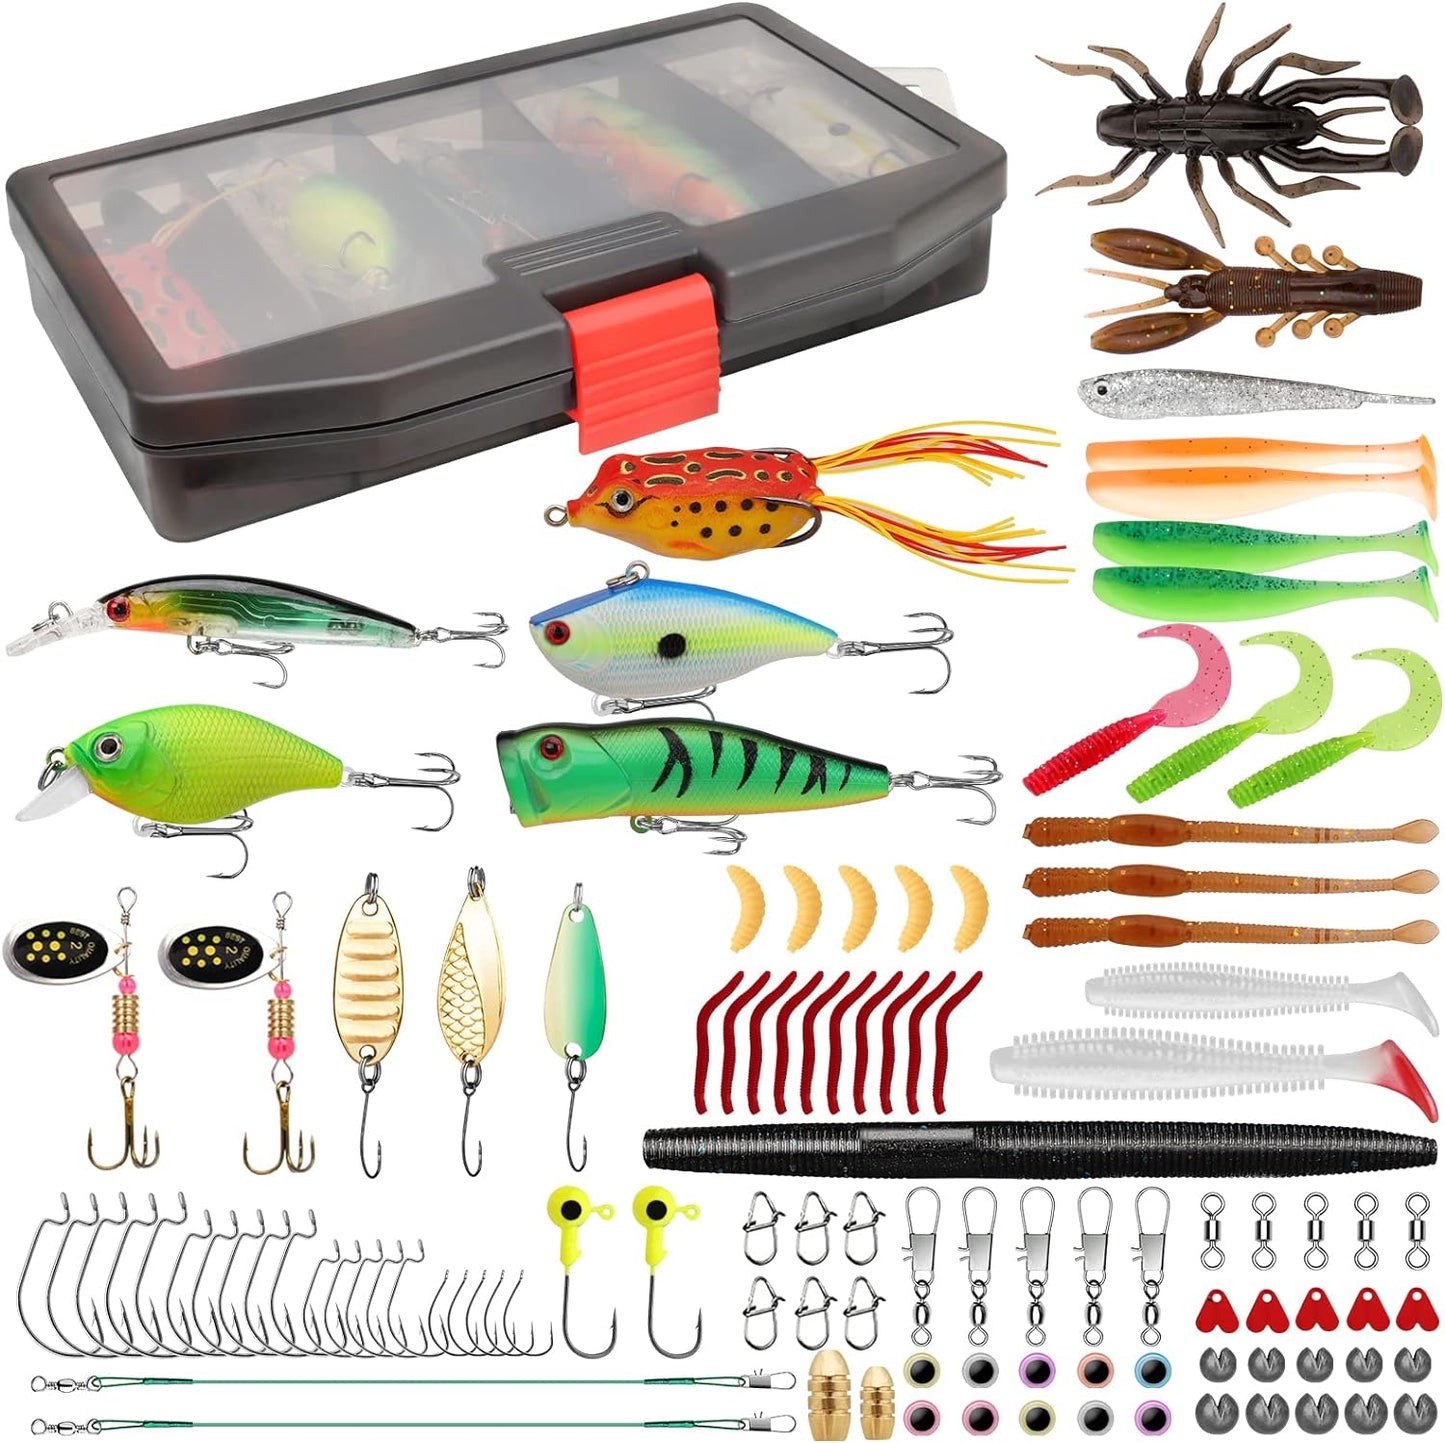 TRUSCEND Fishing Lures Accessories Kit with Tackle Box - Fishing Hooks Minnow Crankbait Frog Popper Lure Worm Fishing Spoon Spinner Bait - Jig Head Fishing Weights Sinkers